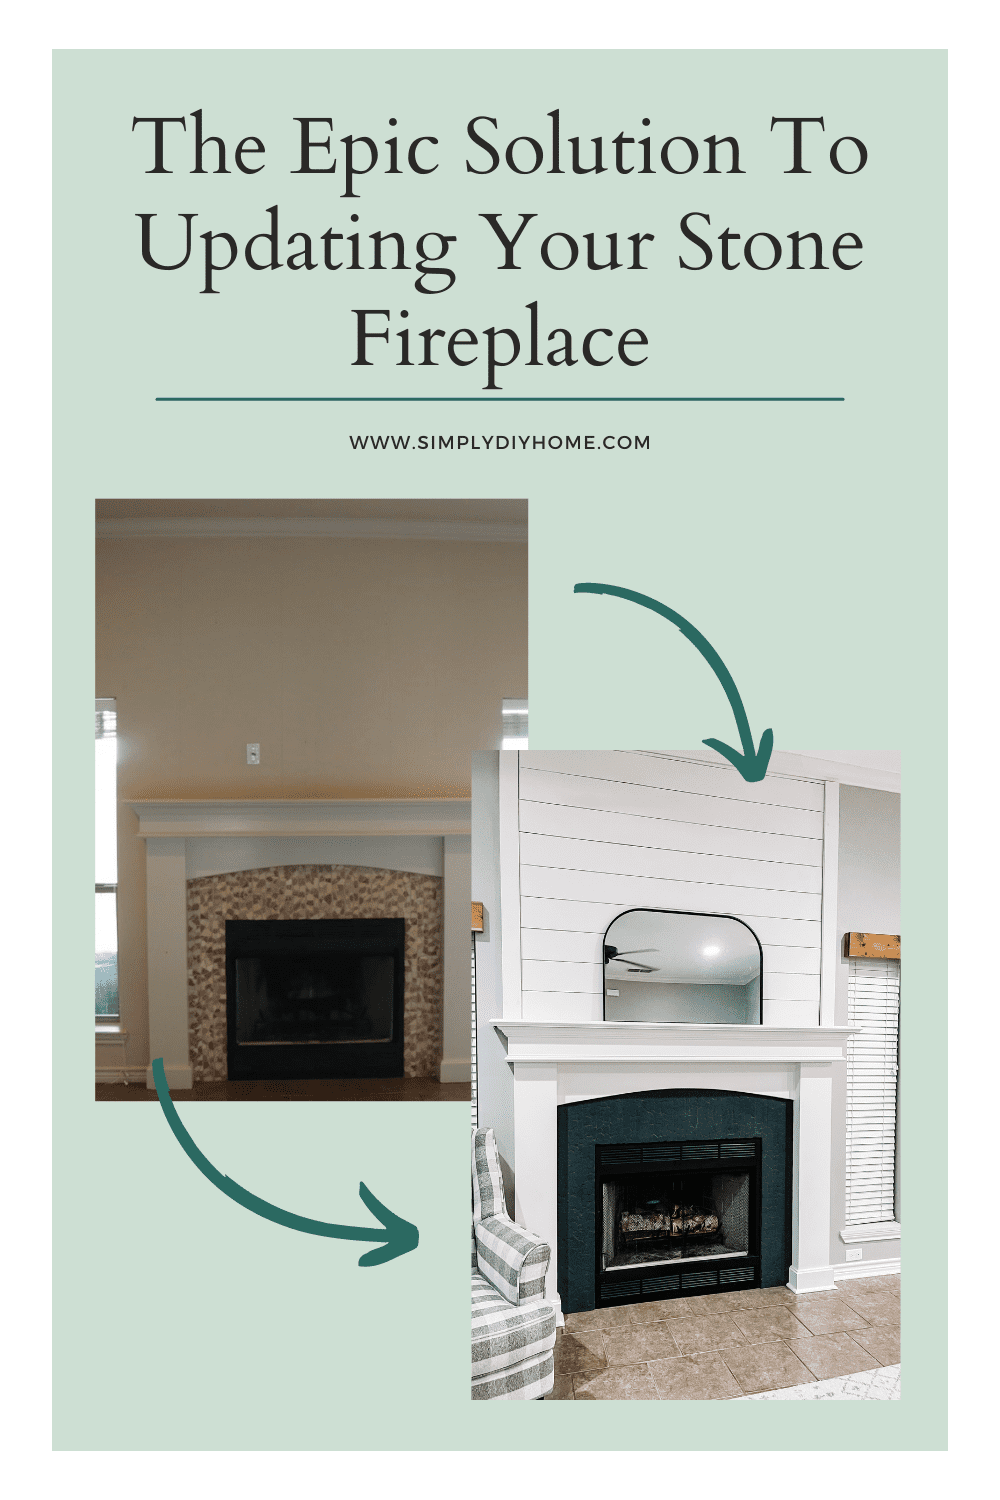 The Epic Solution To Updating Your Stone Fireplace